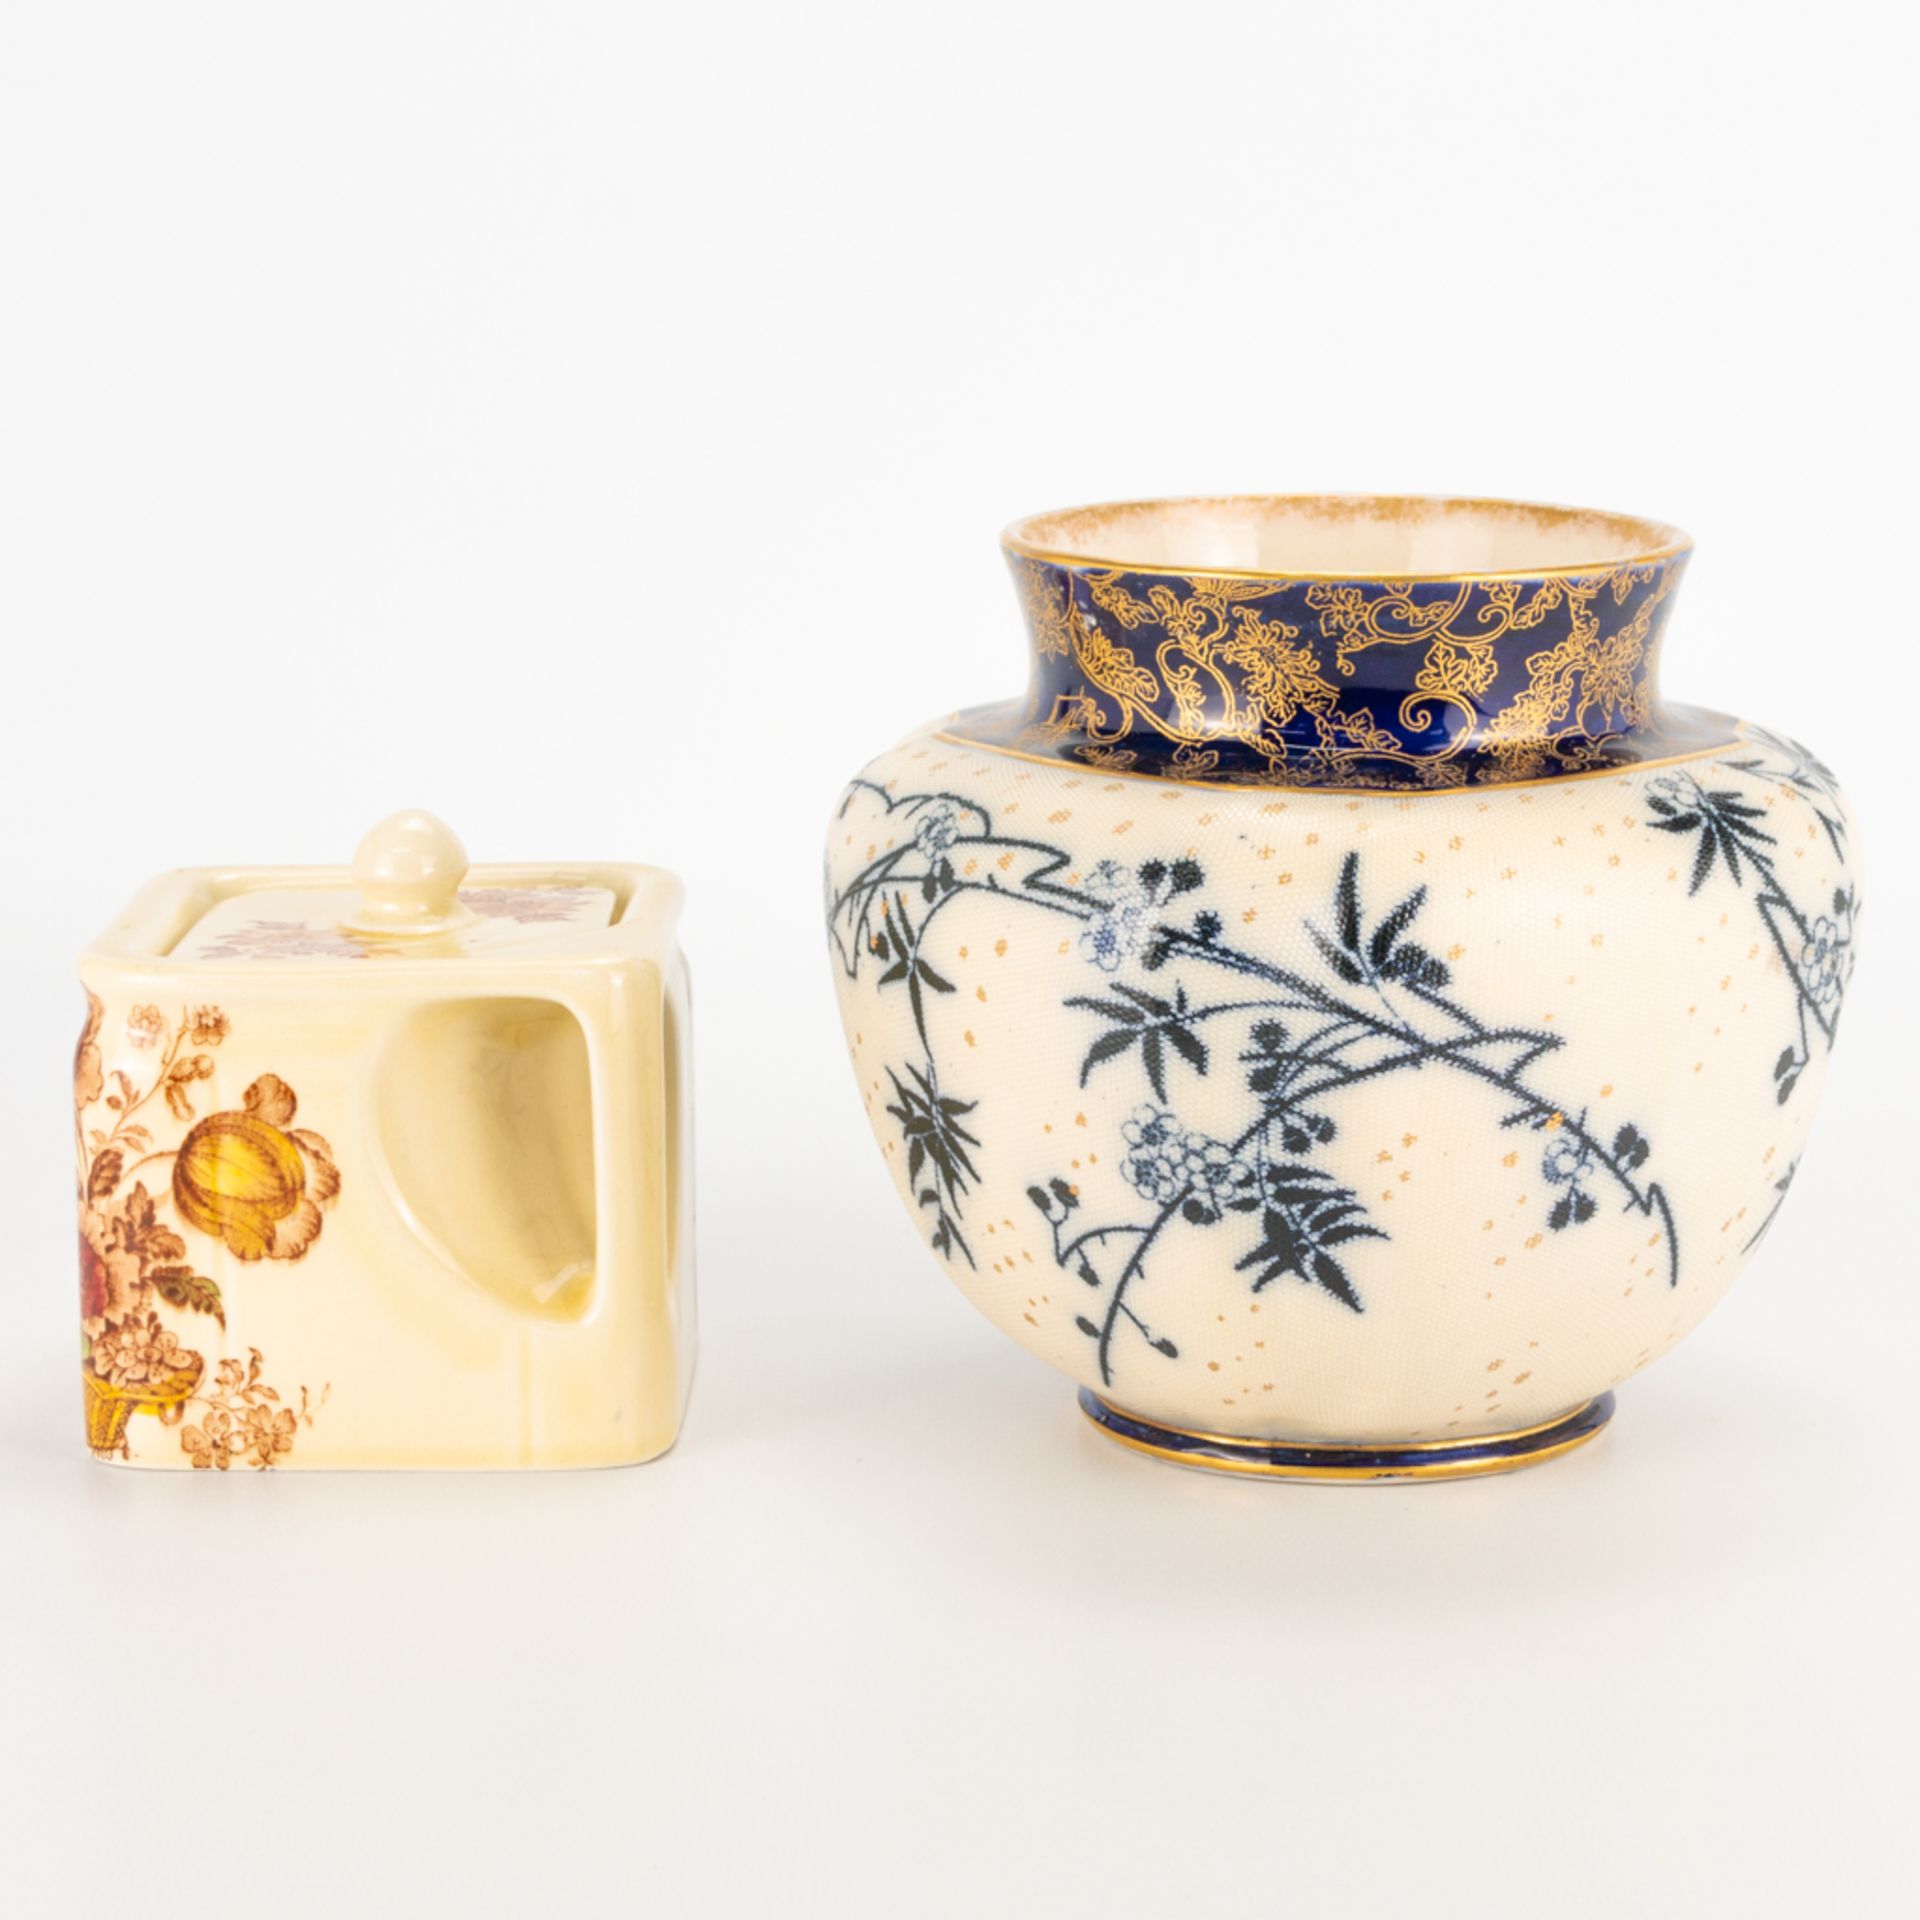 A collection of 2 pieces of English porcelain, a vase made by Doulton and a tea pot made by Clarice - Image 9 of 17